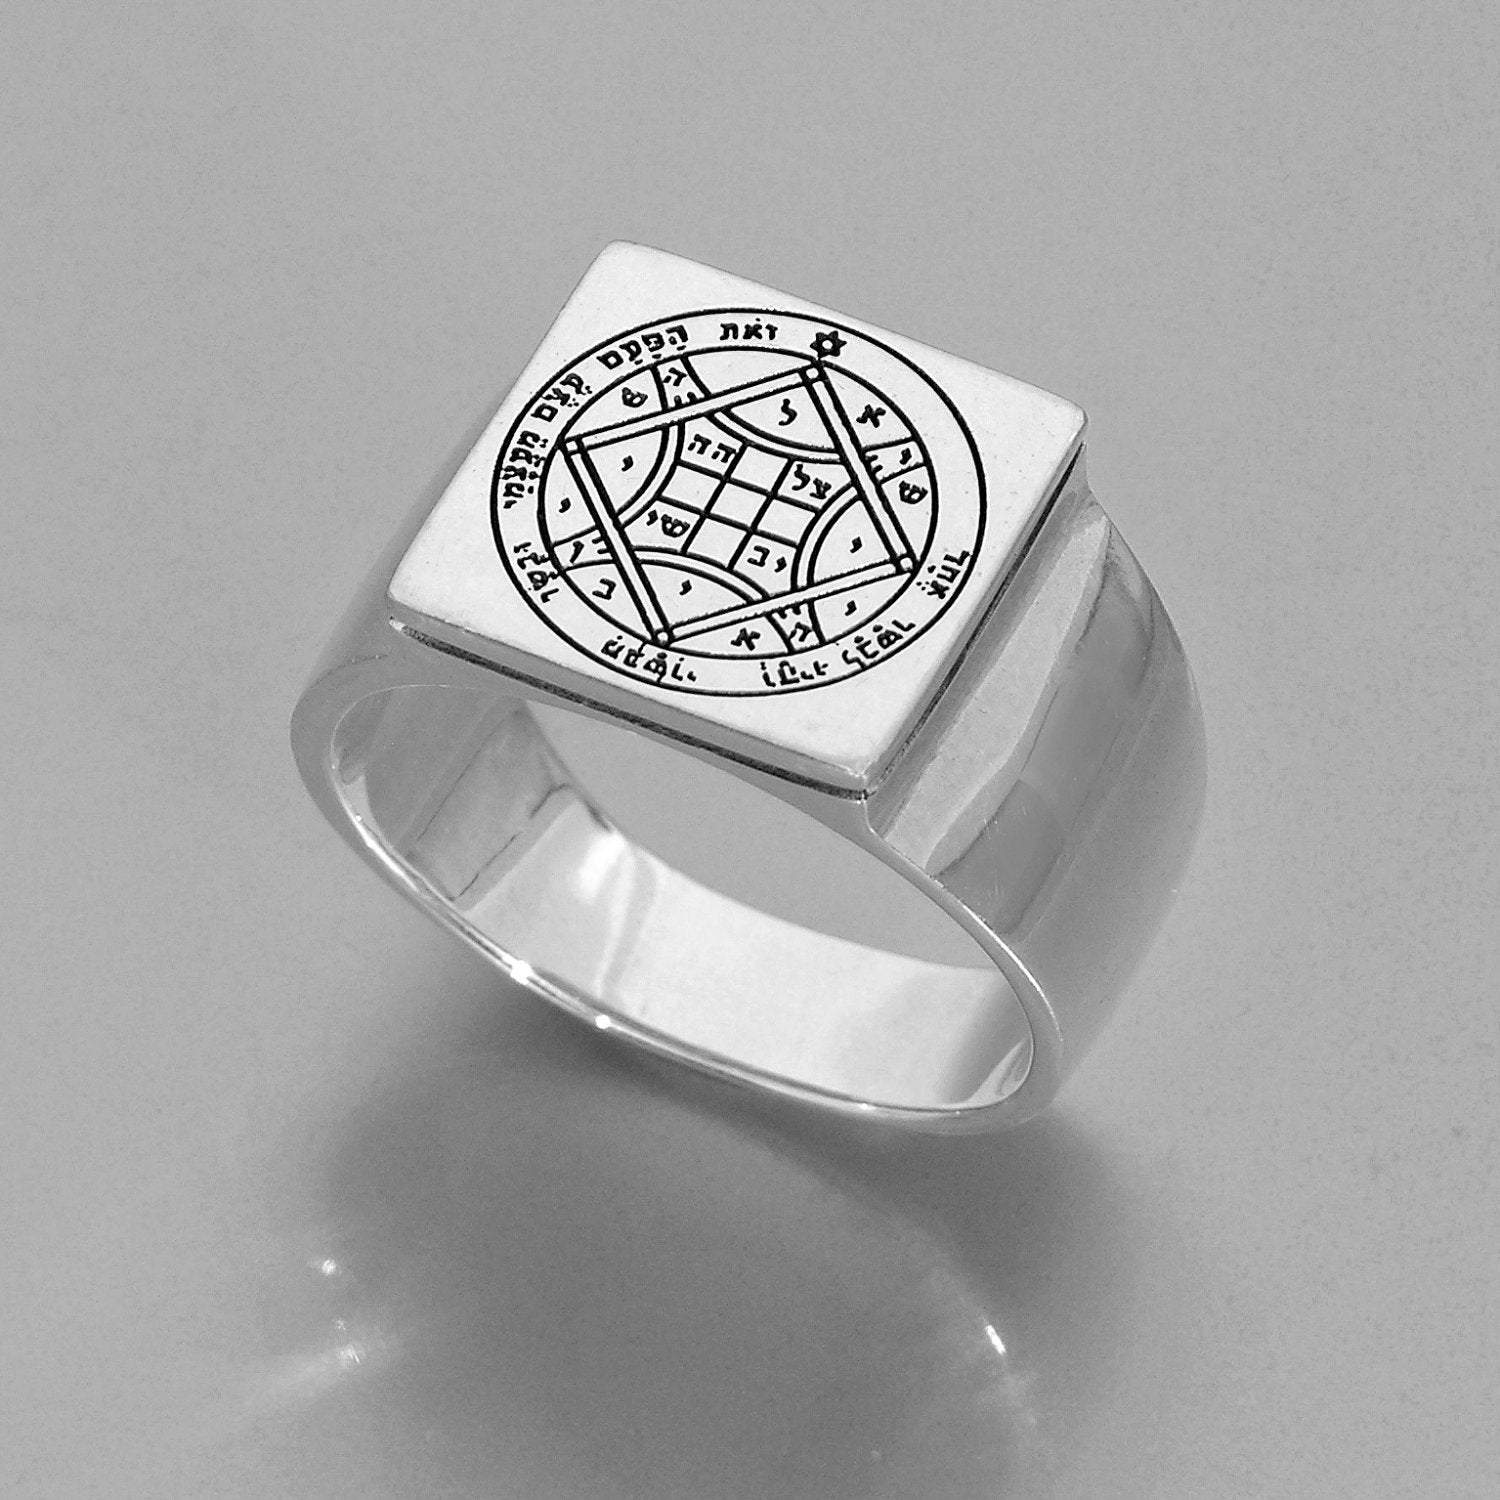 Bluenoemi Jewelry Rings Sterling silver ring . Kabbalah Ring, Love ring, Solomon Love seal , blessing jewelry